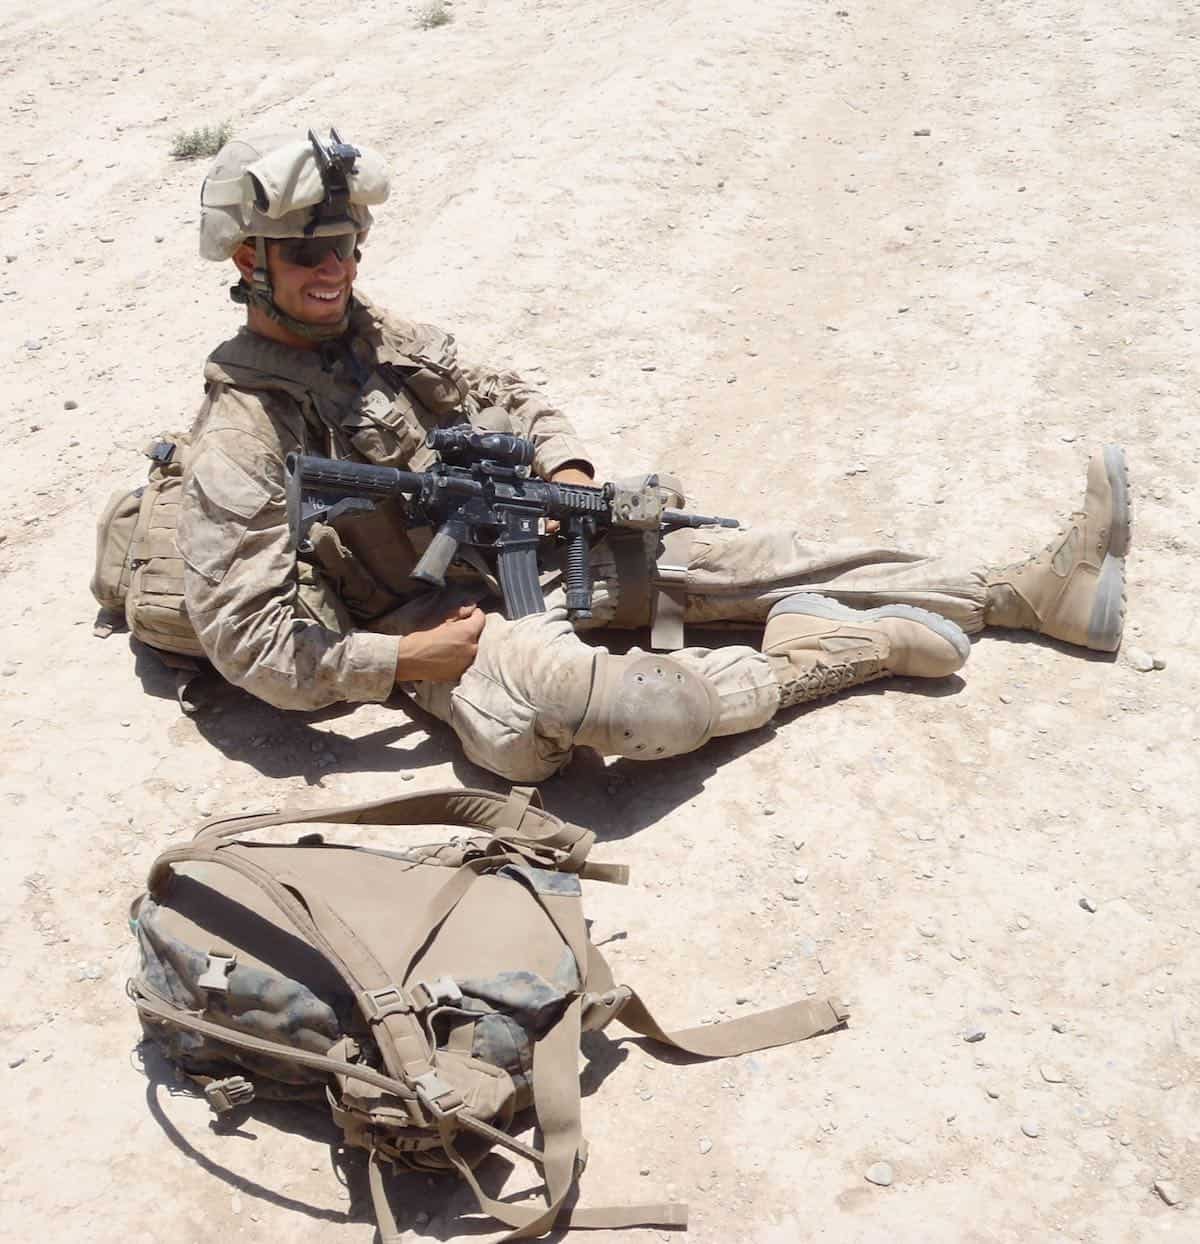 My son in Afghanistan.